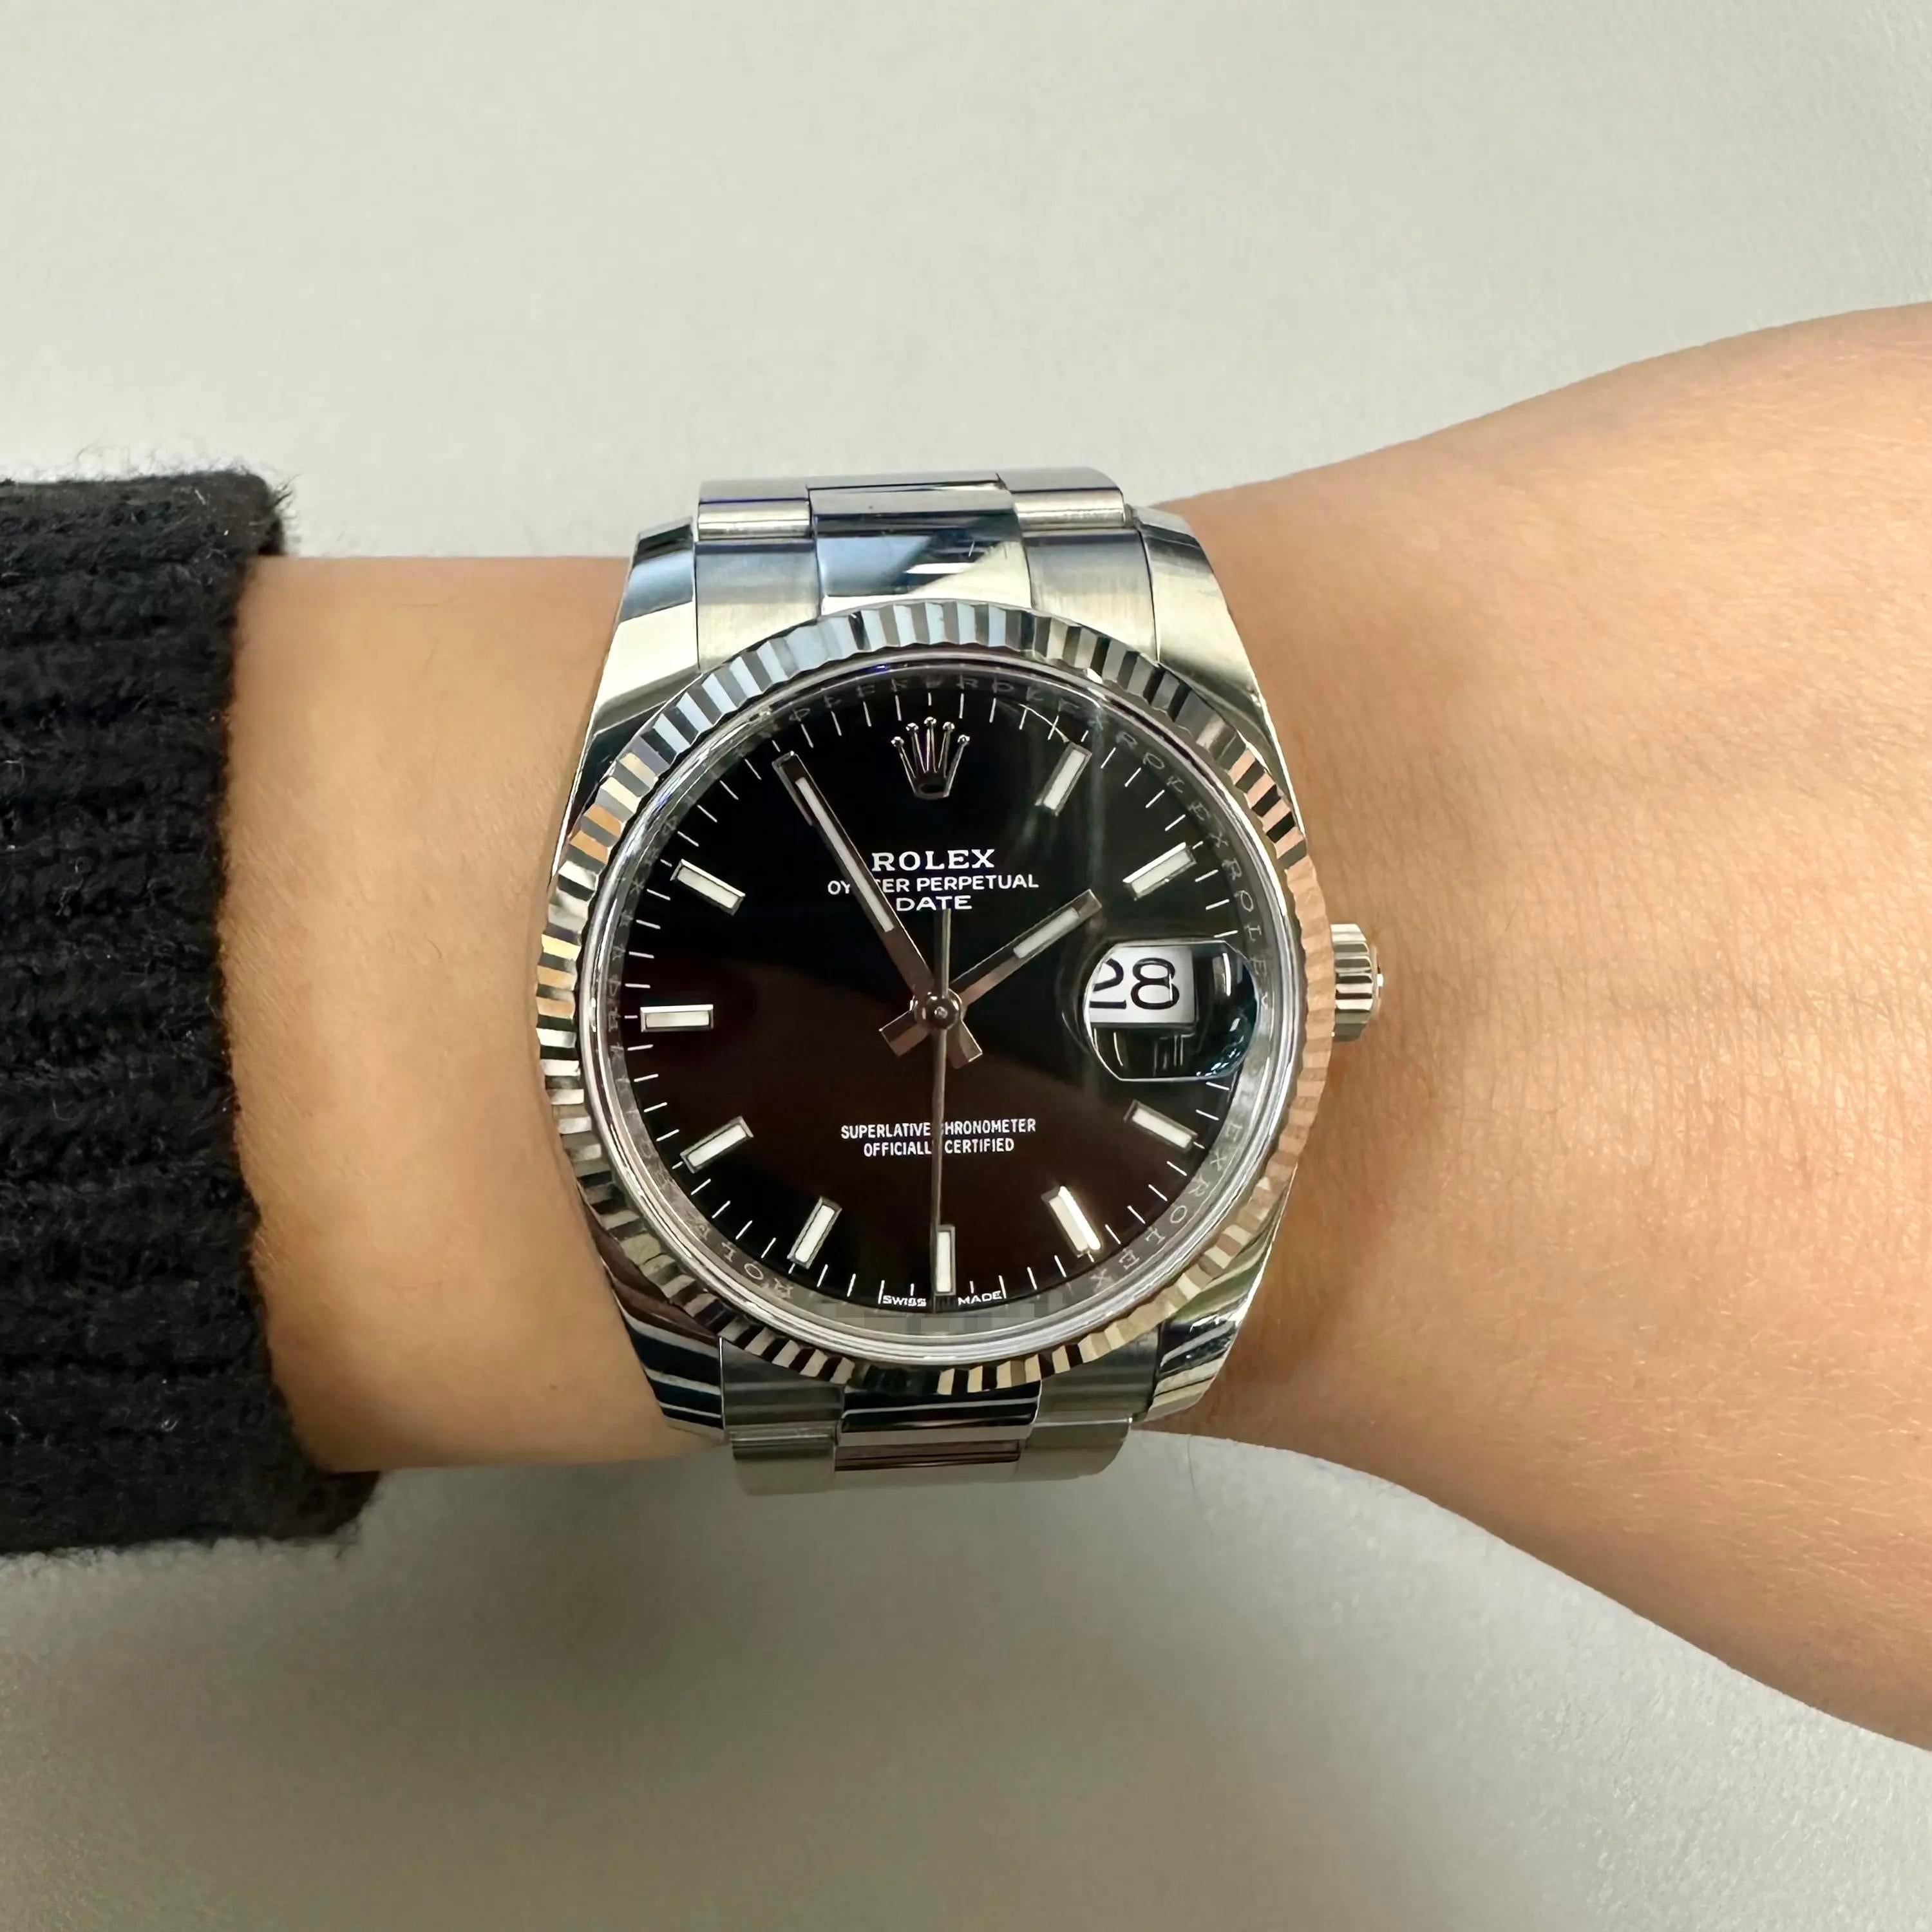 Rolex Oyster Perpetual Date 34mm 18k White Gold Steel Automatic Men Watch 115234 In Excellent Condition For Sale In New York, NY